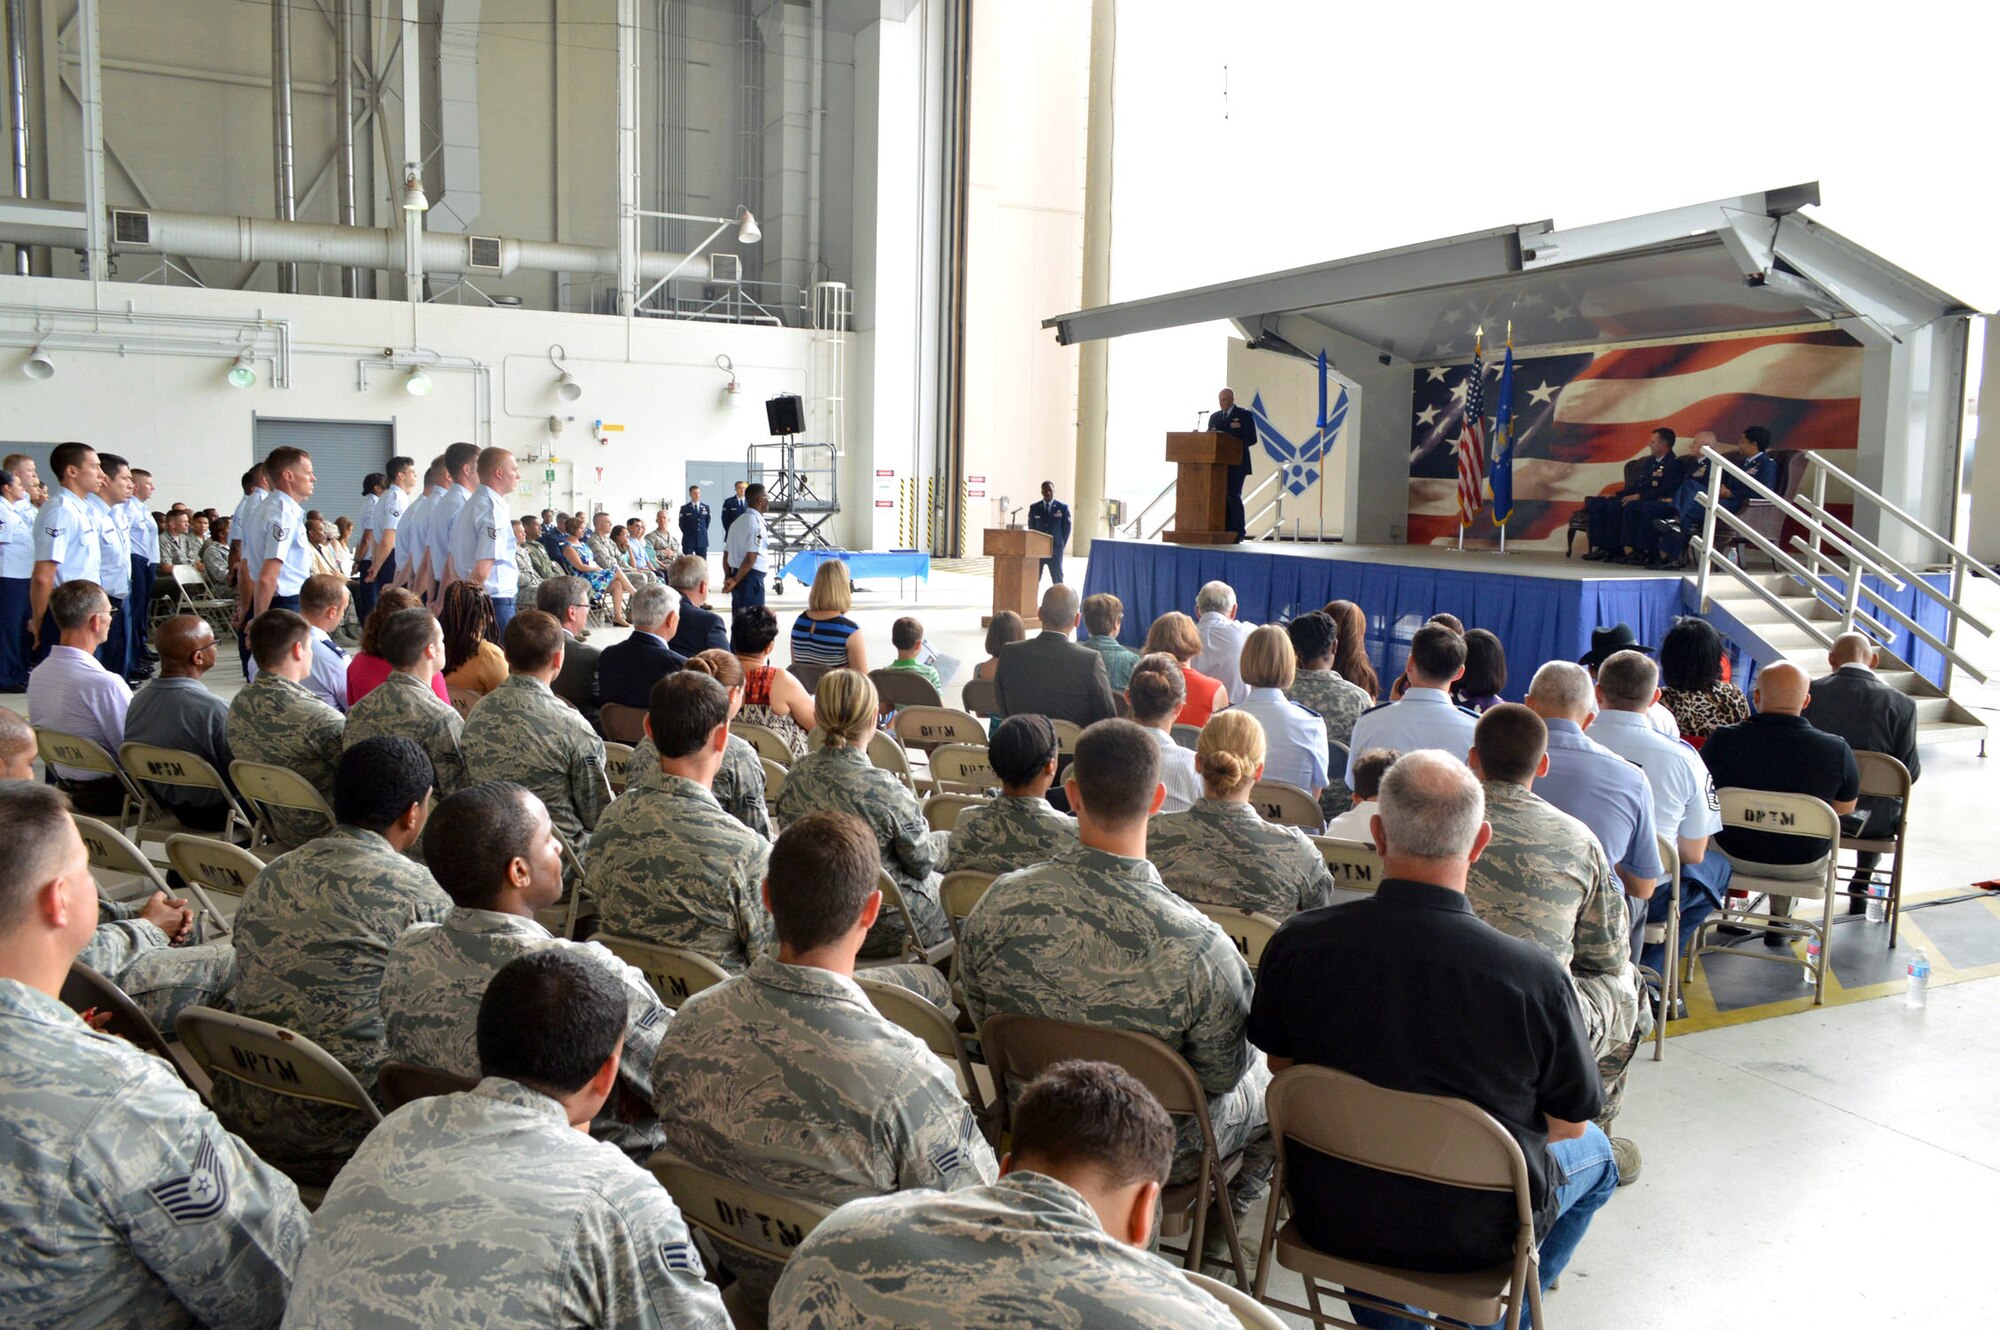 Col. Kenneth Moss, 43rd Airlift Group commander, addresses attendees during the 43rd Air Base Squadron redesignation and change of command ceremony July 1, 2015, at Pope Army Airfield, North Carolina. Logistics and force support Airmen and functions transferred to the newly established 43rd ABS from the inactivated 43rd Logistics Readiness Squadron and the 43rd Force Support Squadron. (U.S. Air Force photo/Marvin Krause)